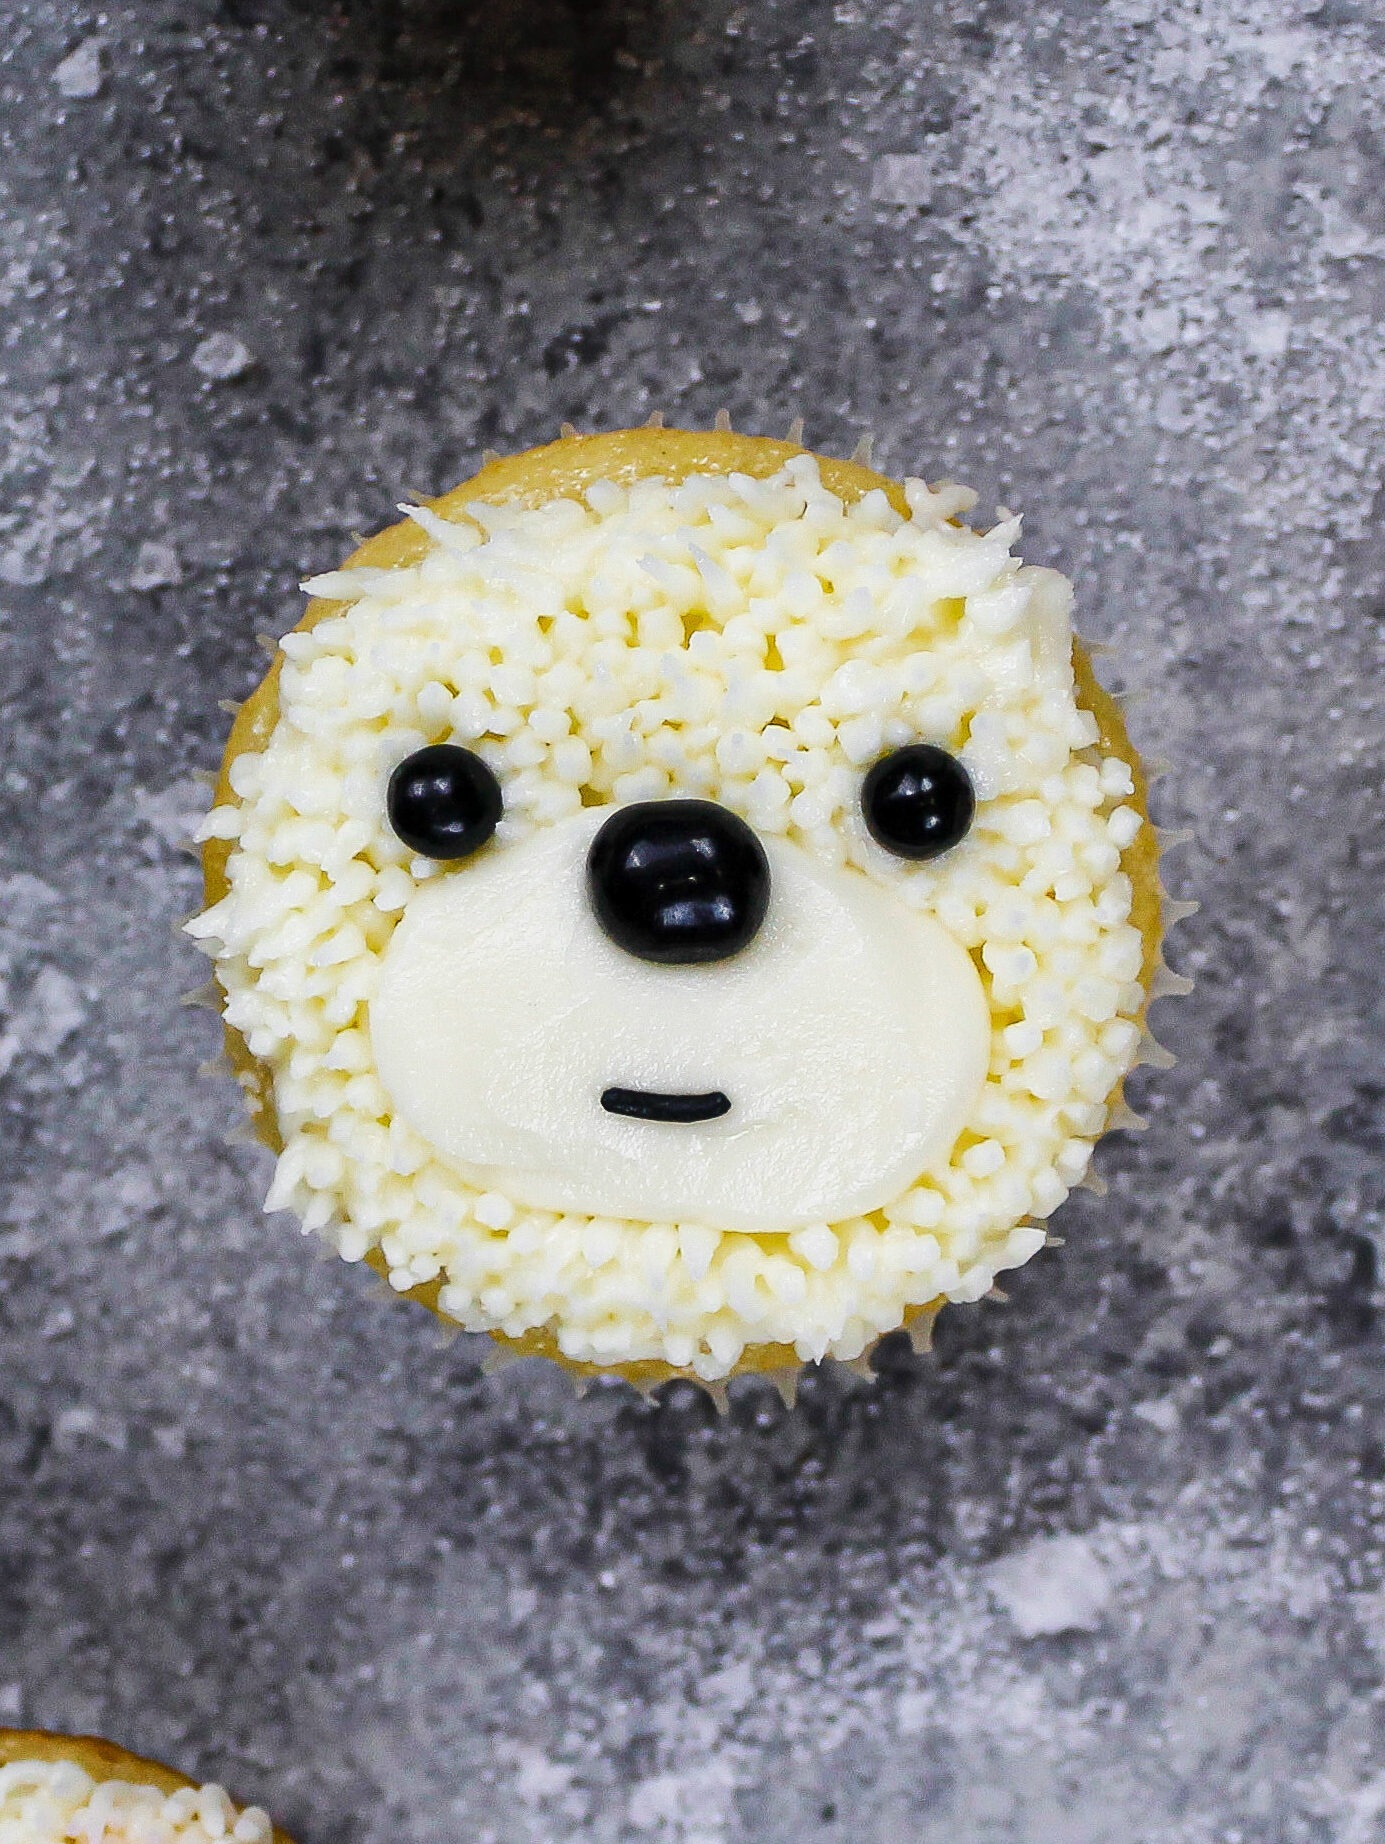 image of a polar bear cupcake being made with buttercream and black sprinkles for the face